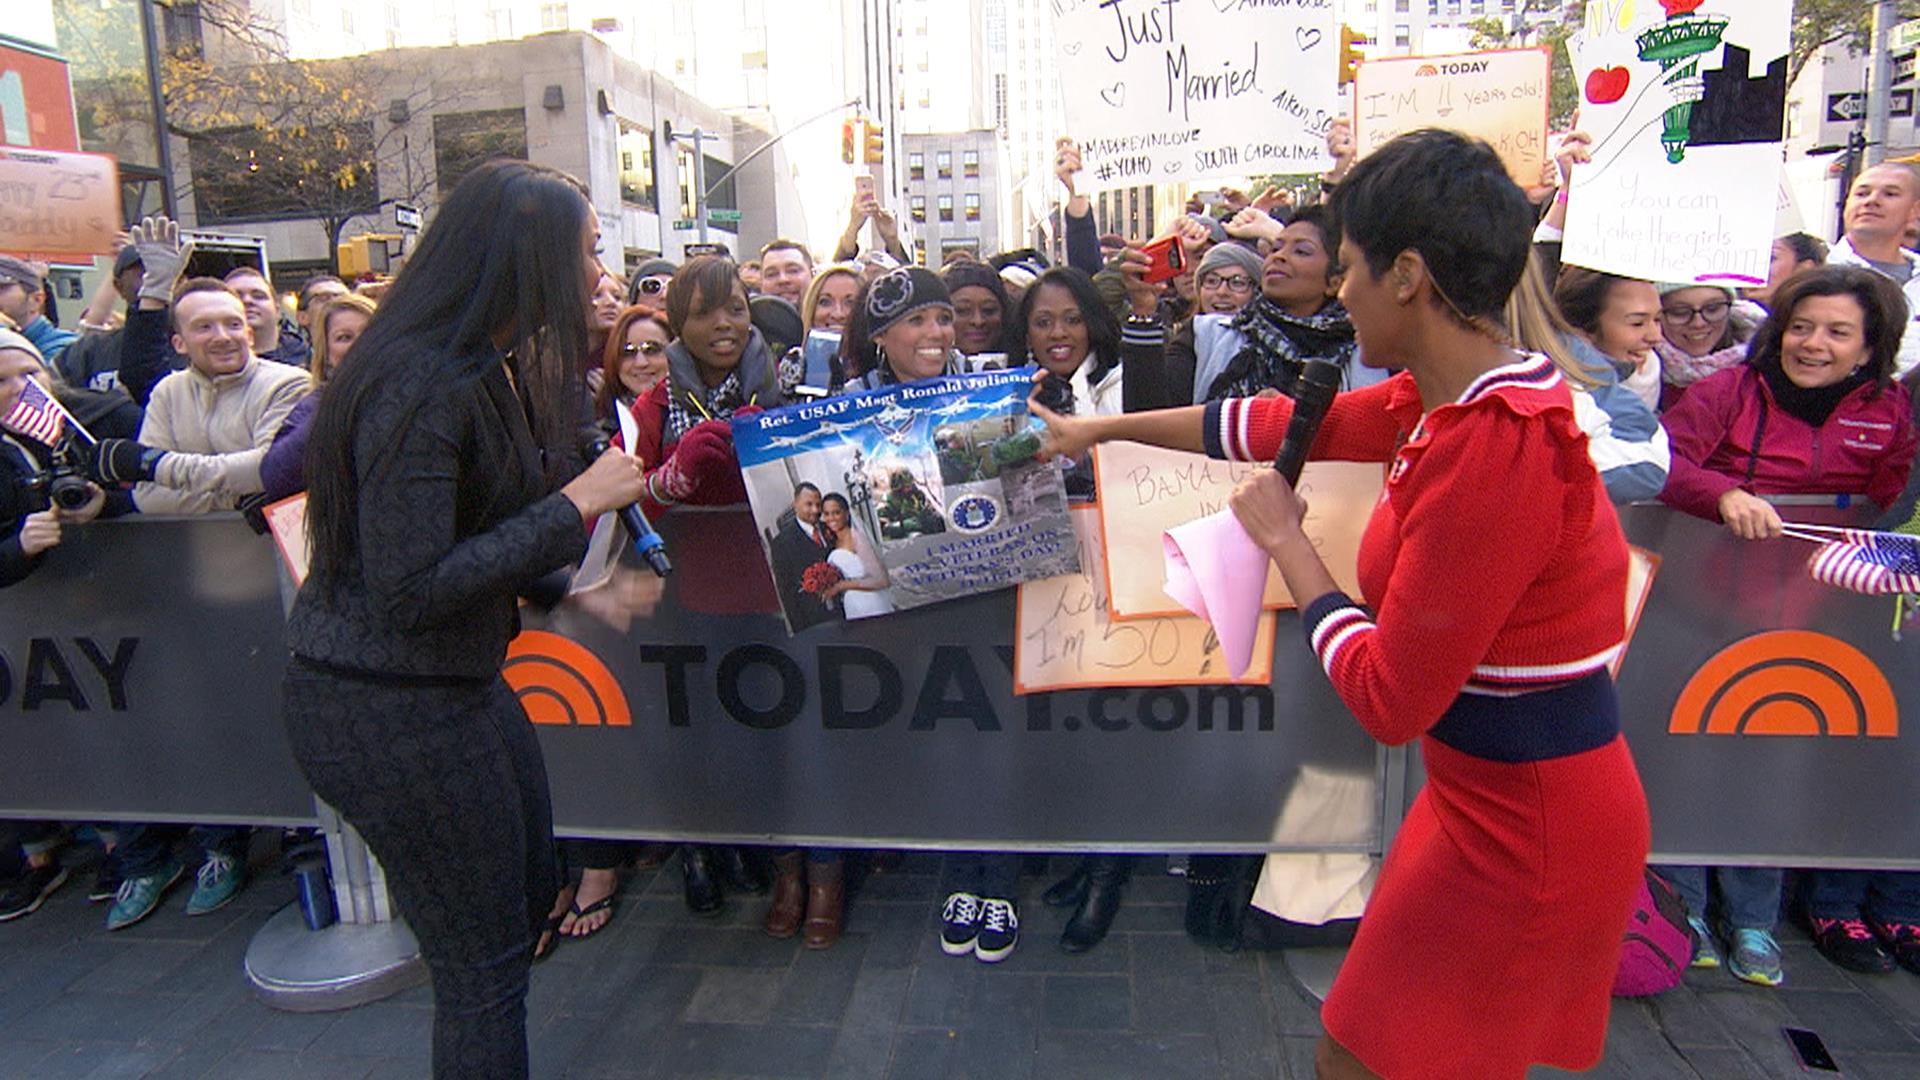 Freebie Friday: Tamron Hall, Jordan Sparks give away pillows (with a secret surprise!)